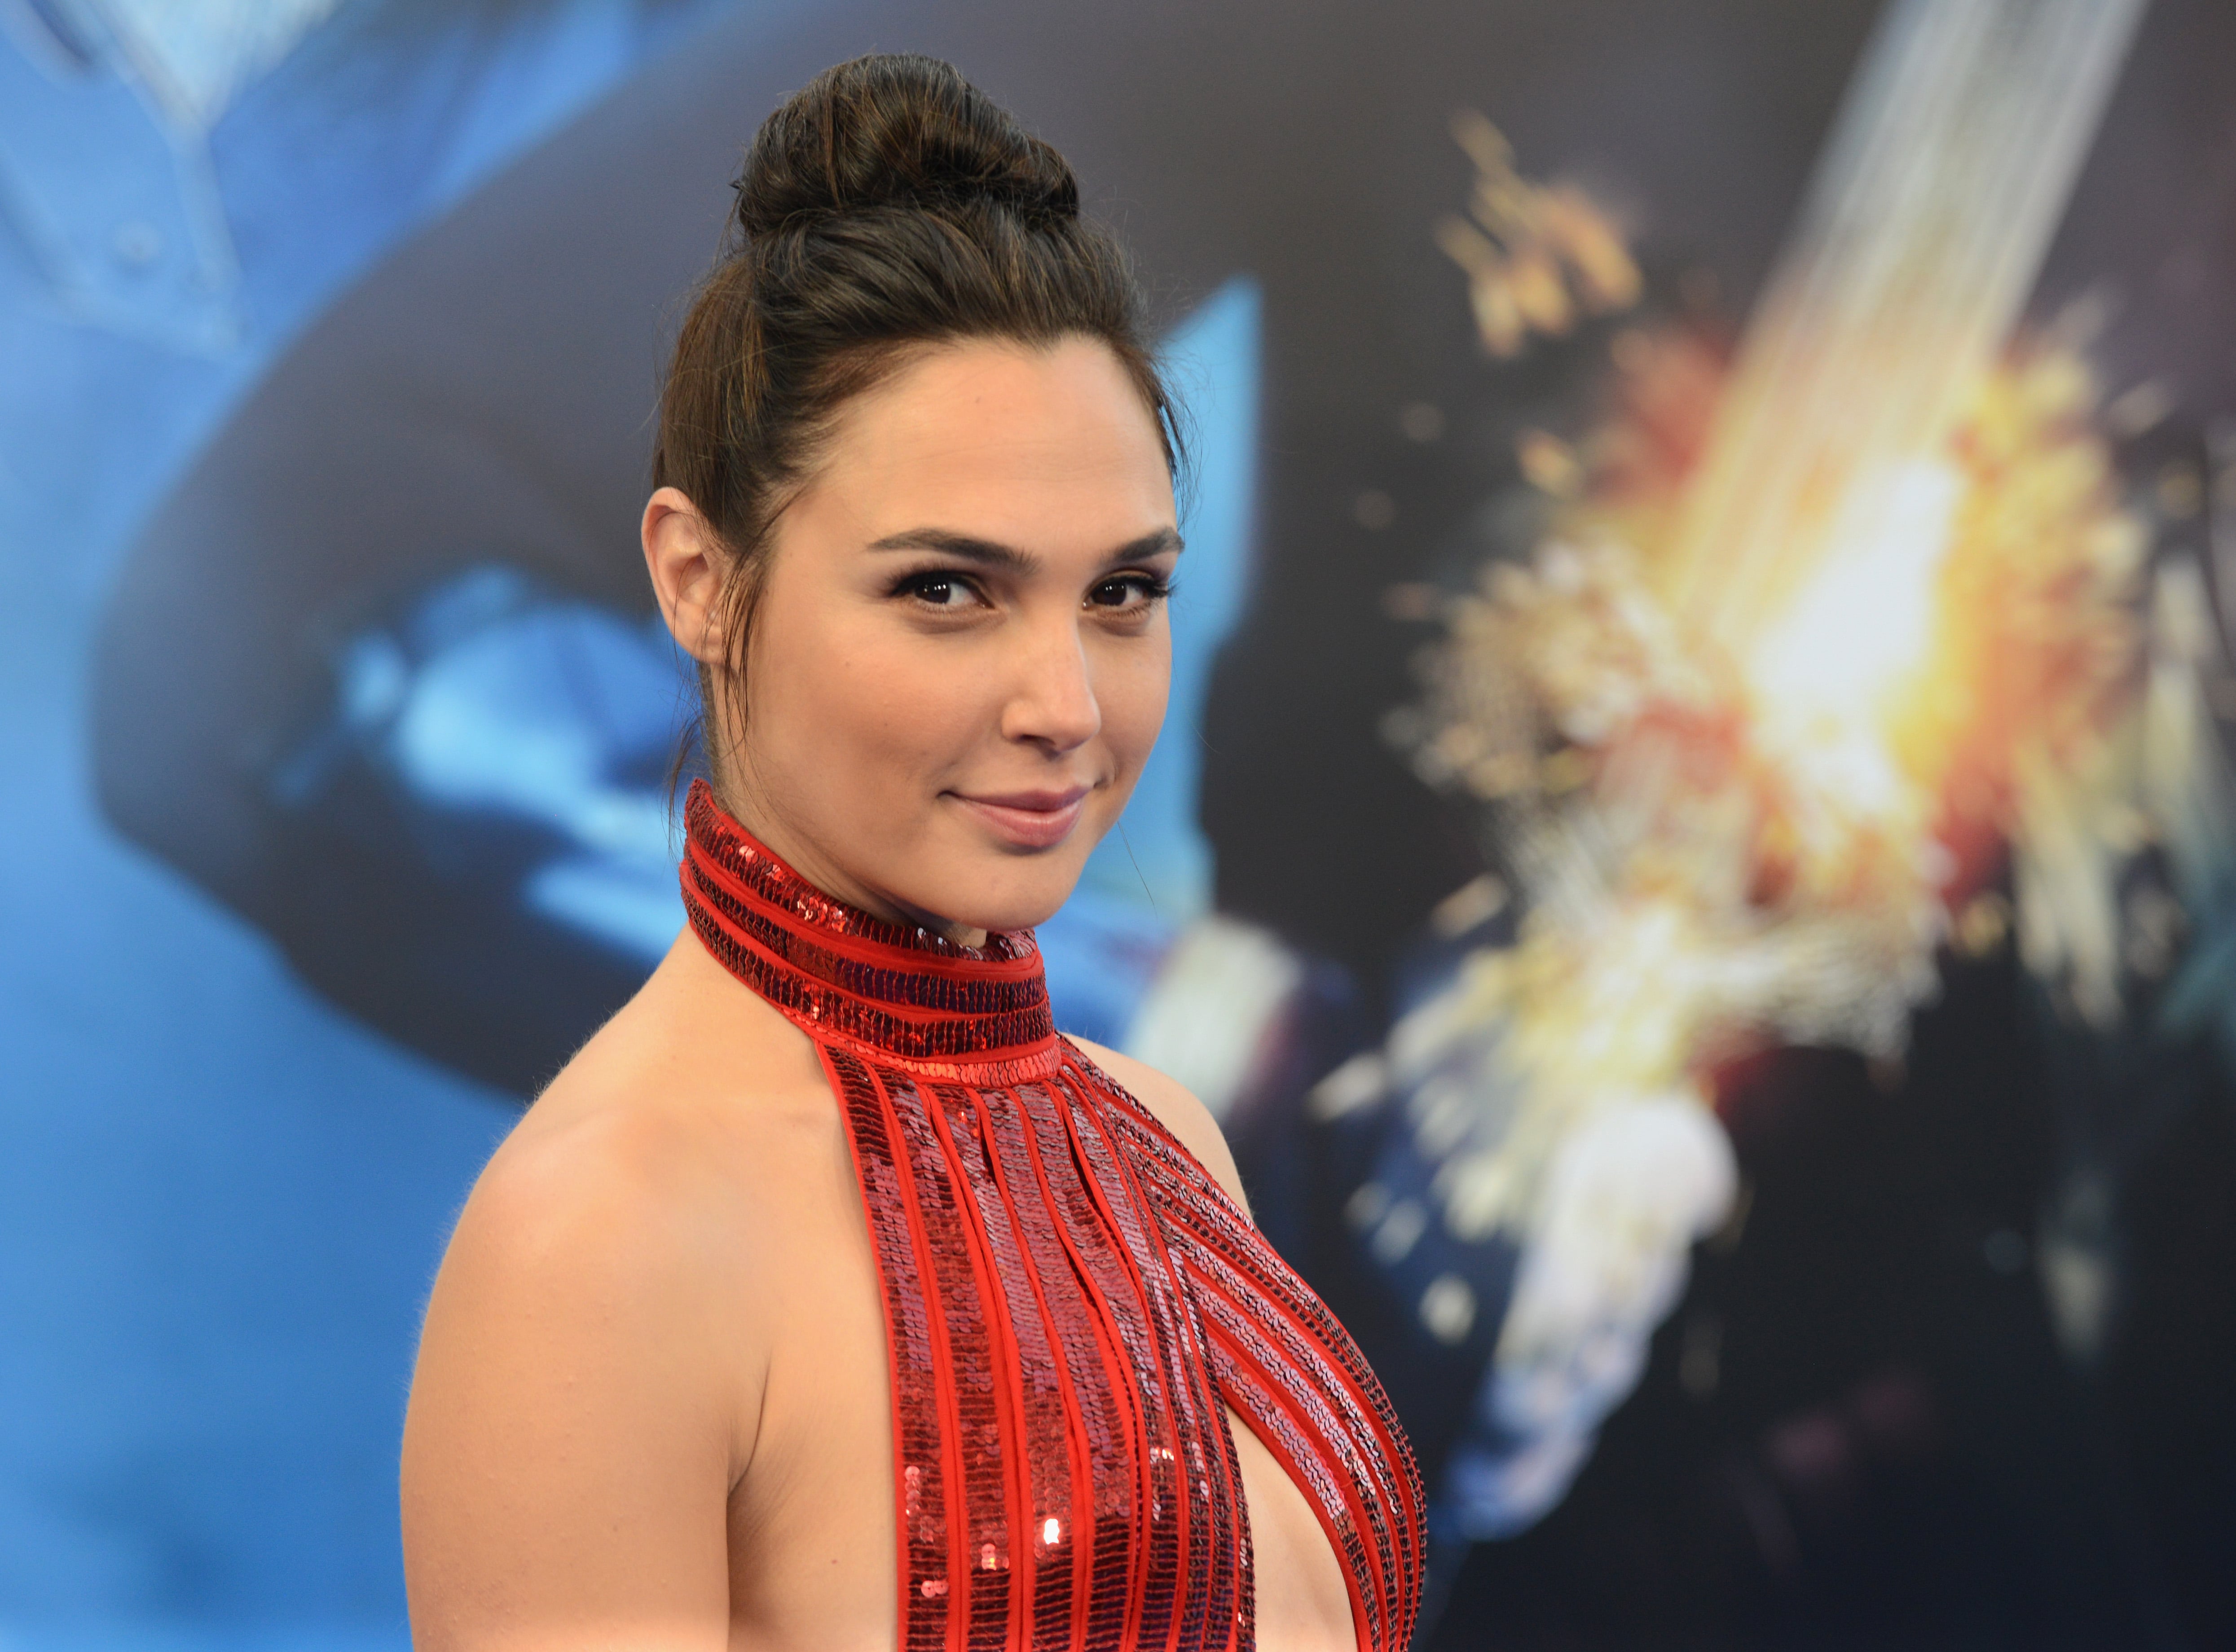 Wonder Woman star Gal Gadot would give birth 'once a week' if she